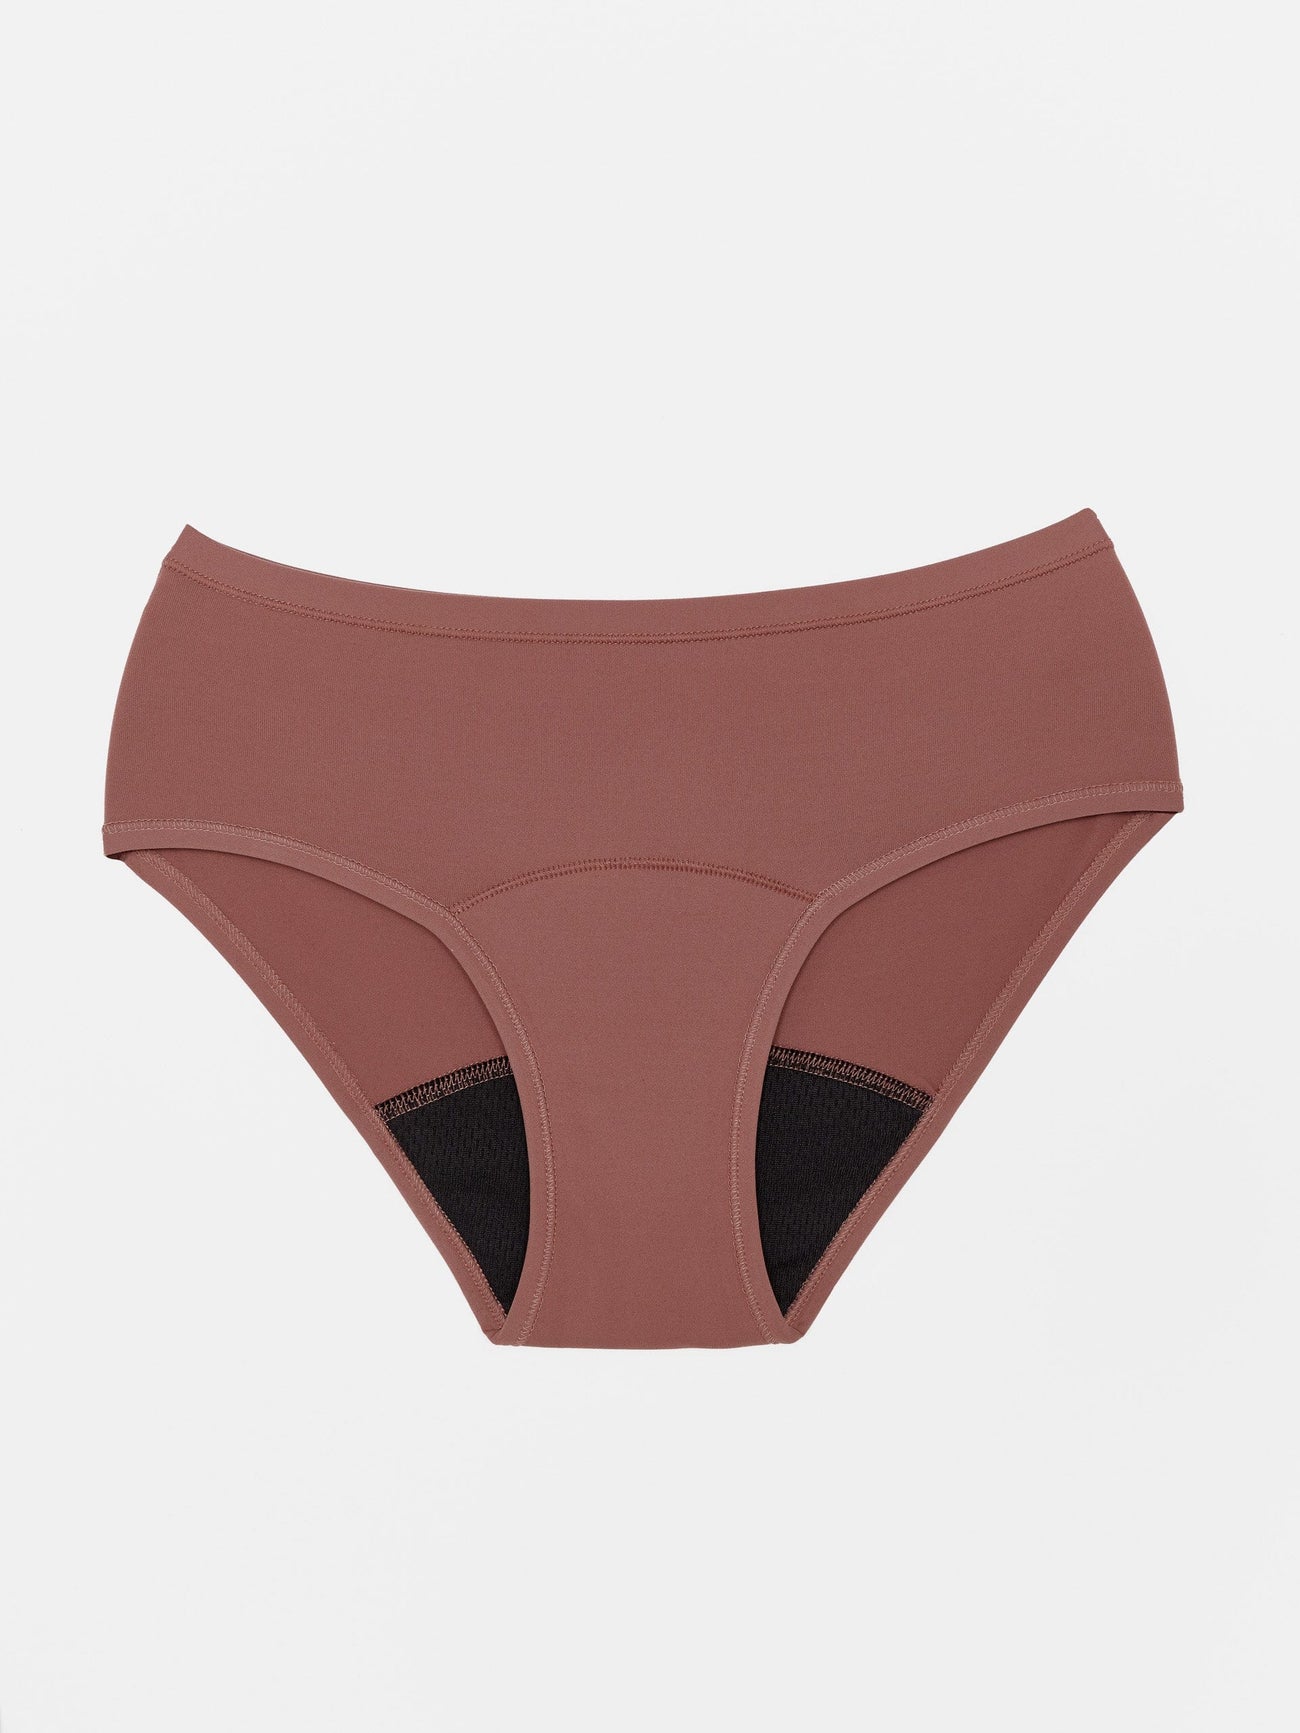 Snuggs Period Underwear Classic: Heavy Flow Raspberry cloth period knickers  for heavy periods 